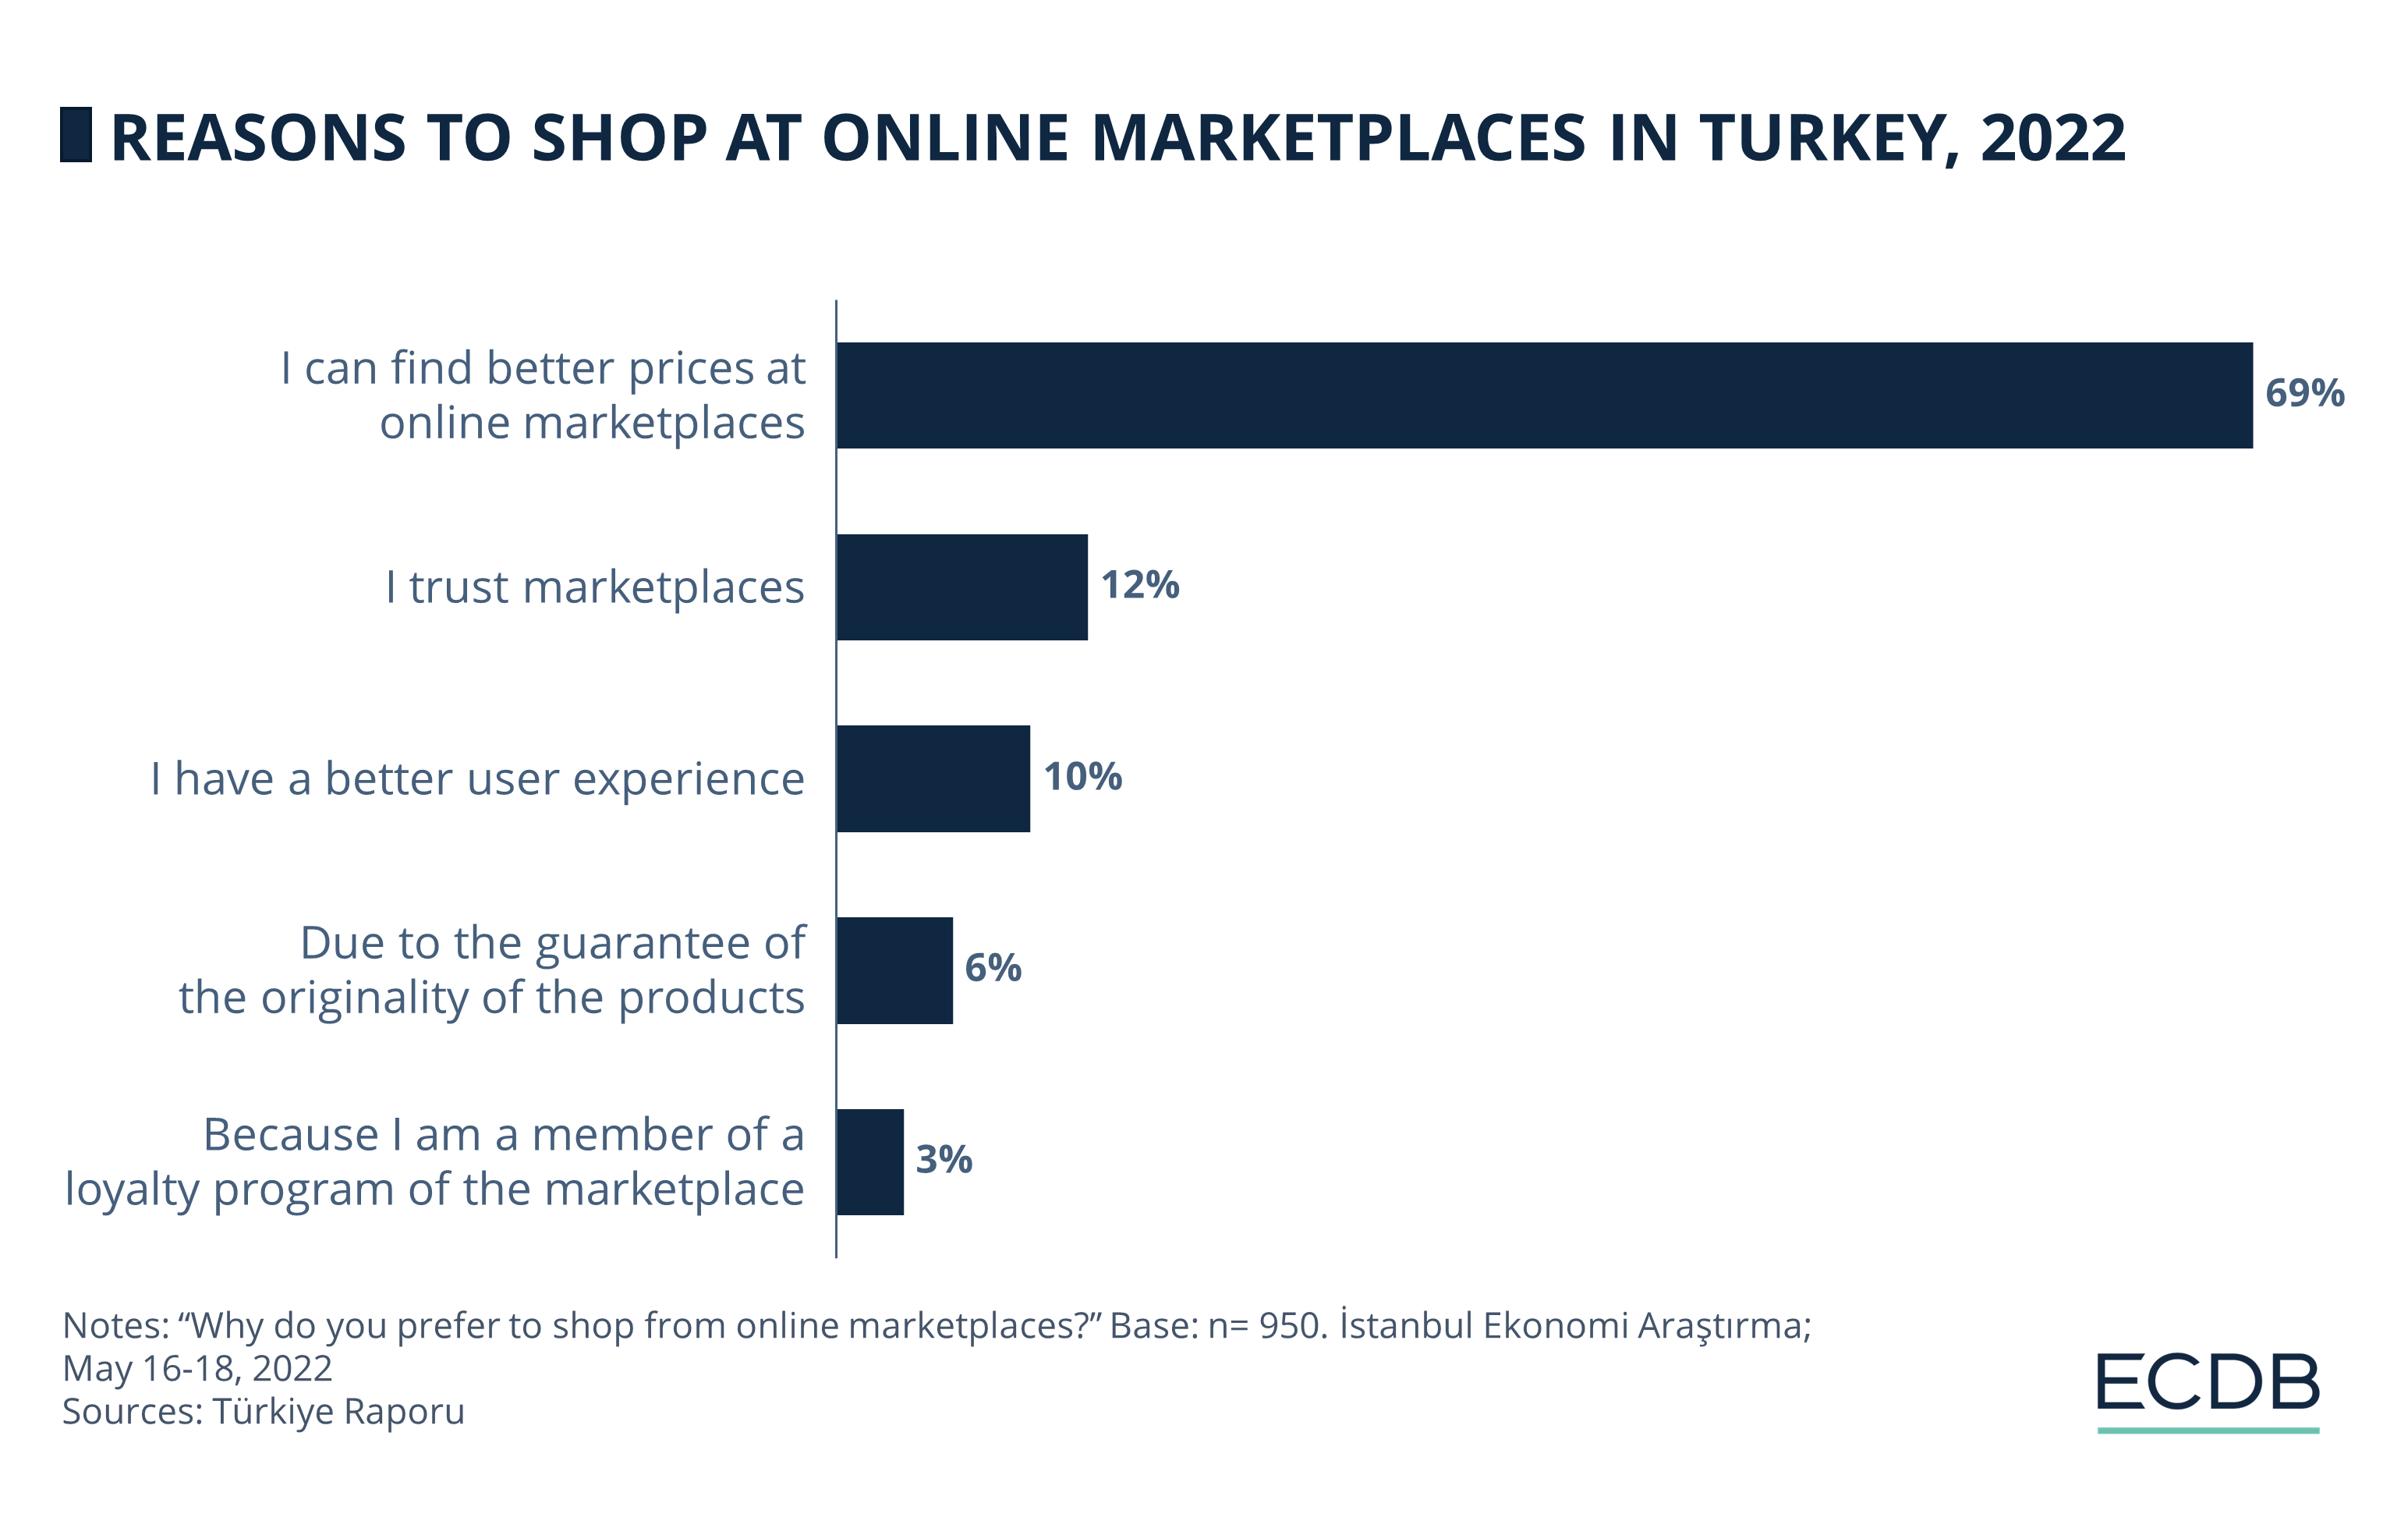 Reasons to Shop at Online Marketplaces in Turkey, 2022